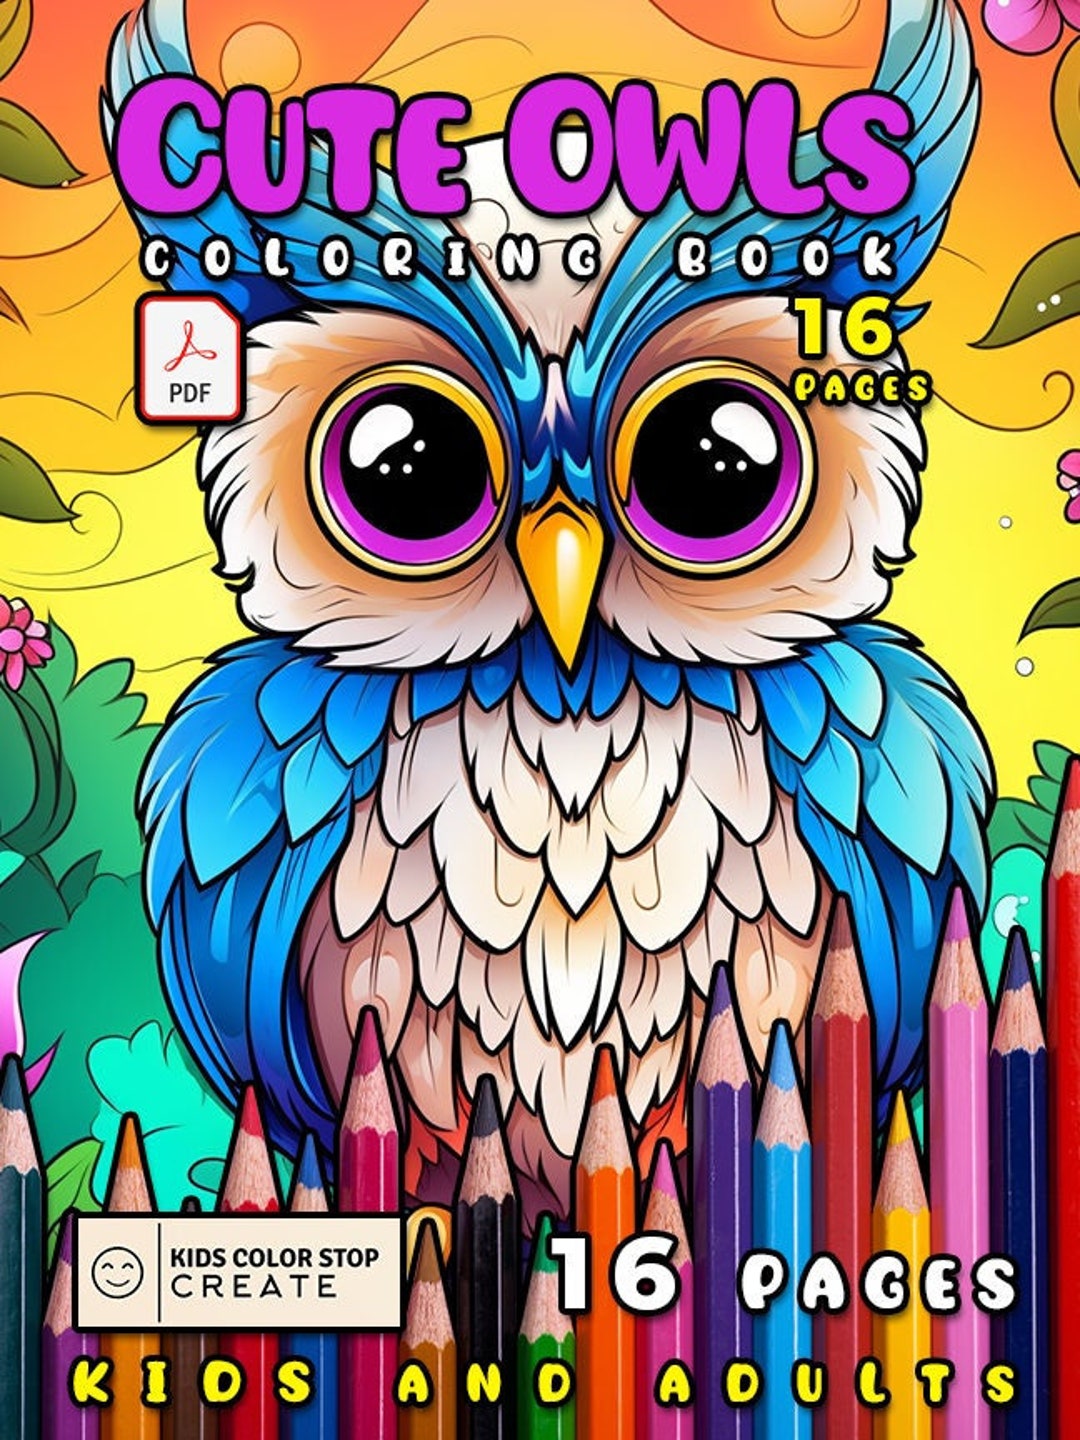 Cute Owls Coloring Books For Adults: An Adult Fantasy Coloring Book For Owl  Lover with Fun, Easy, and Relaxing Coloring Pages, 44 Unique Designs with  (Large Print / Paperback)